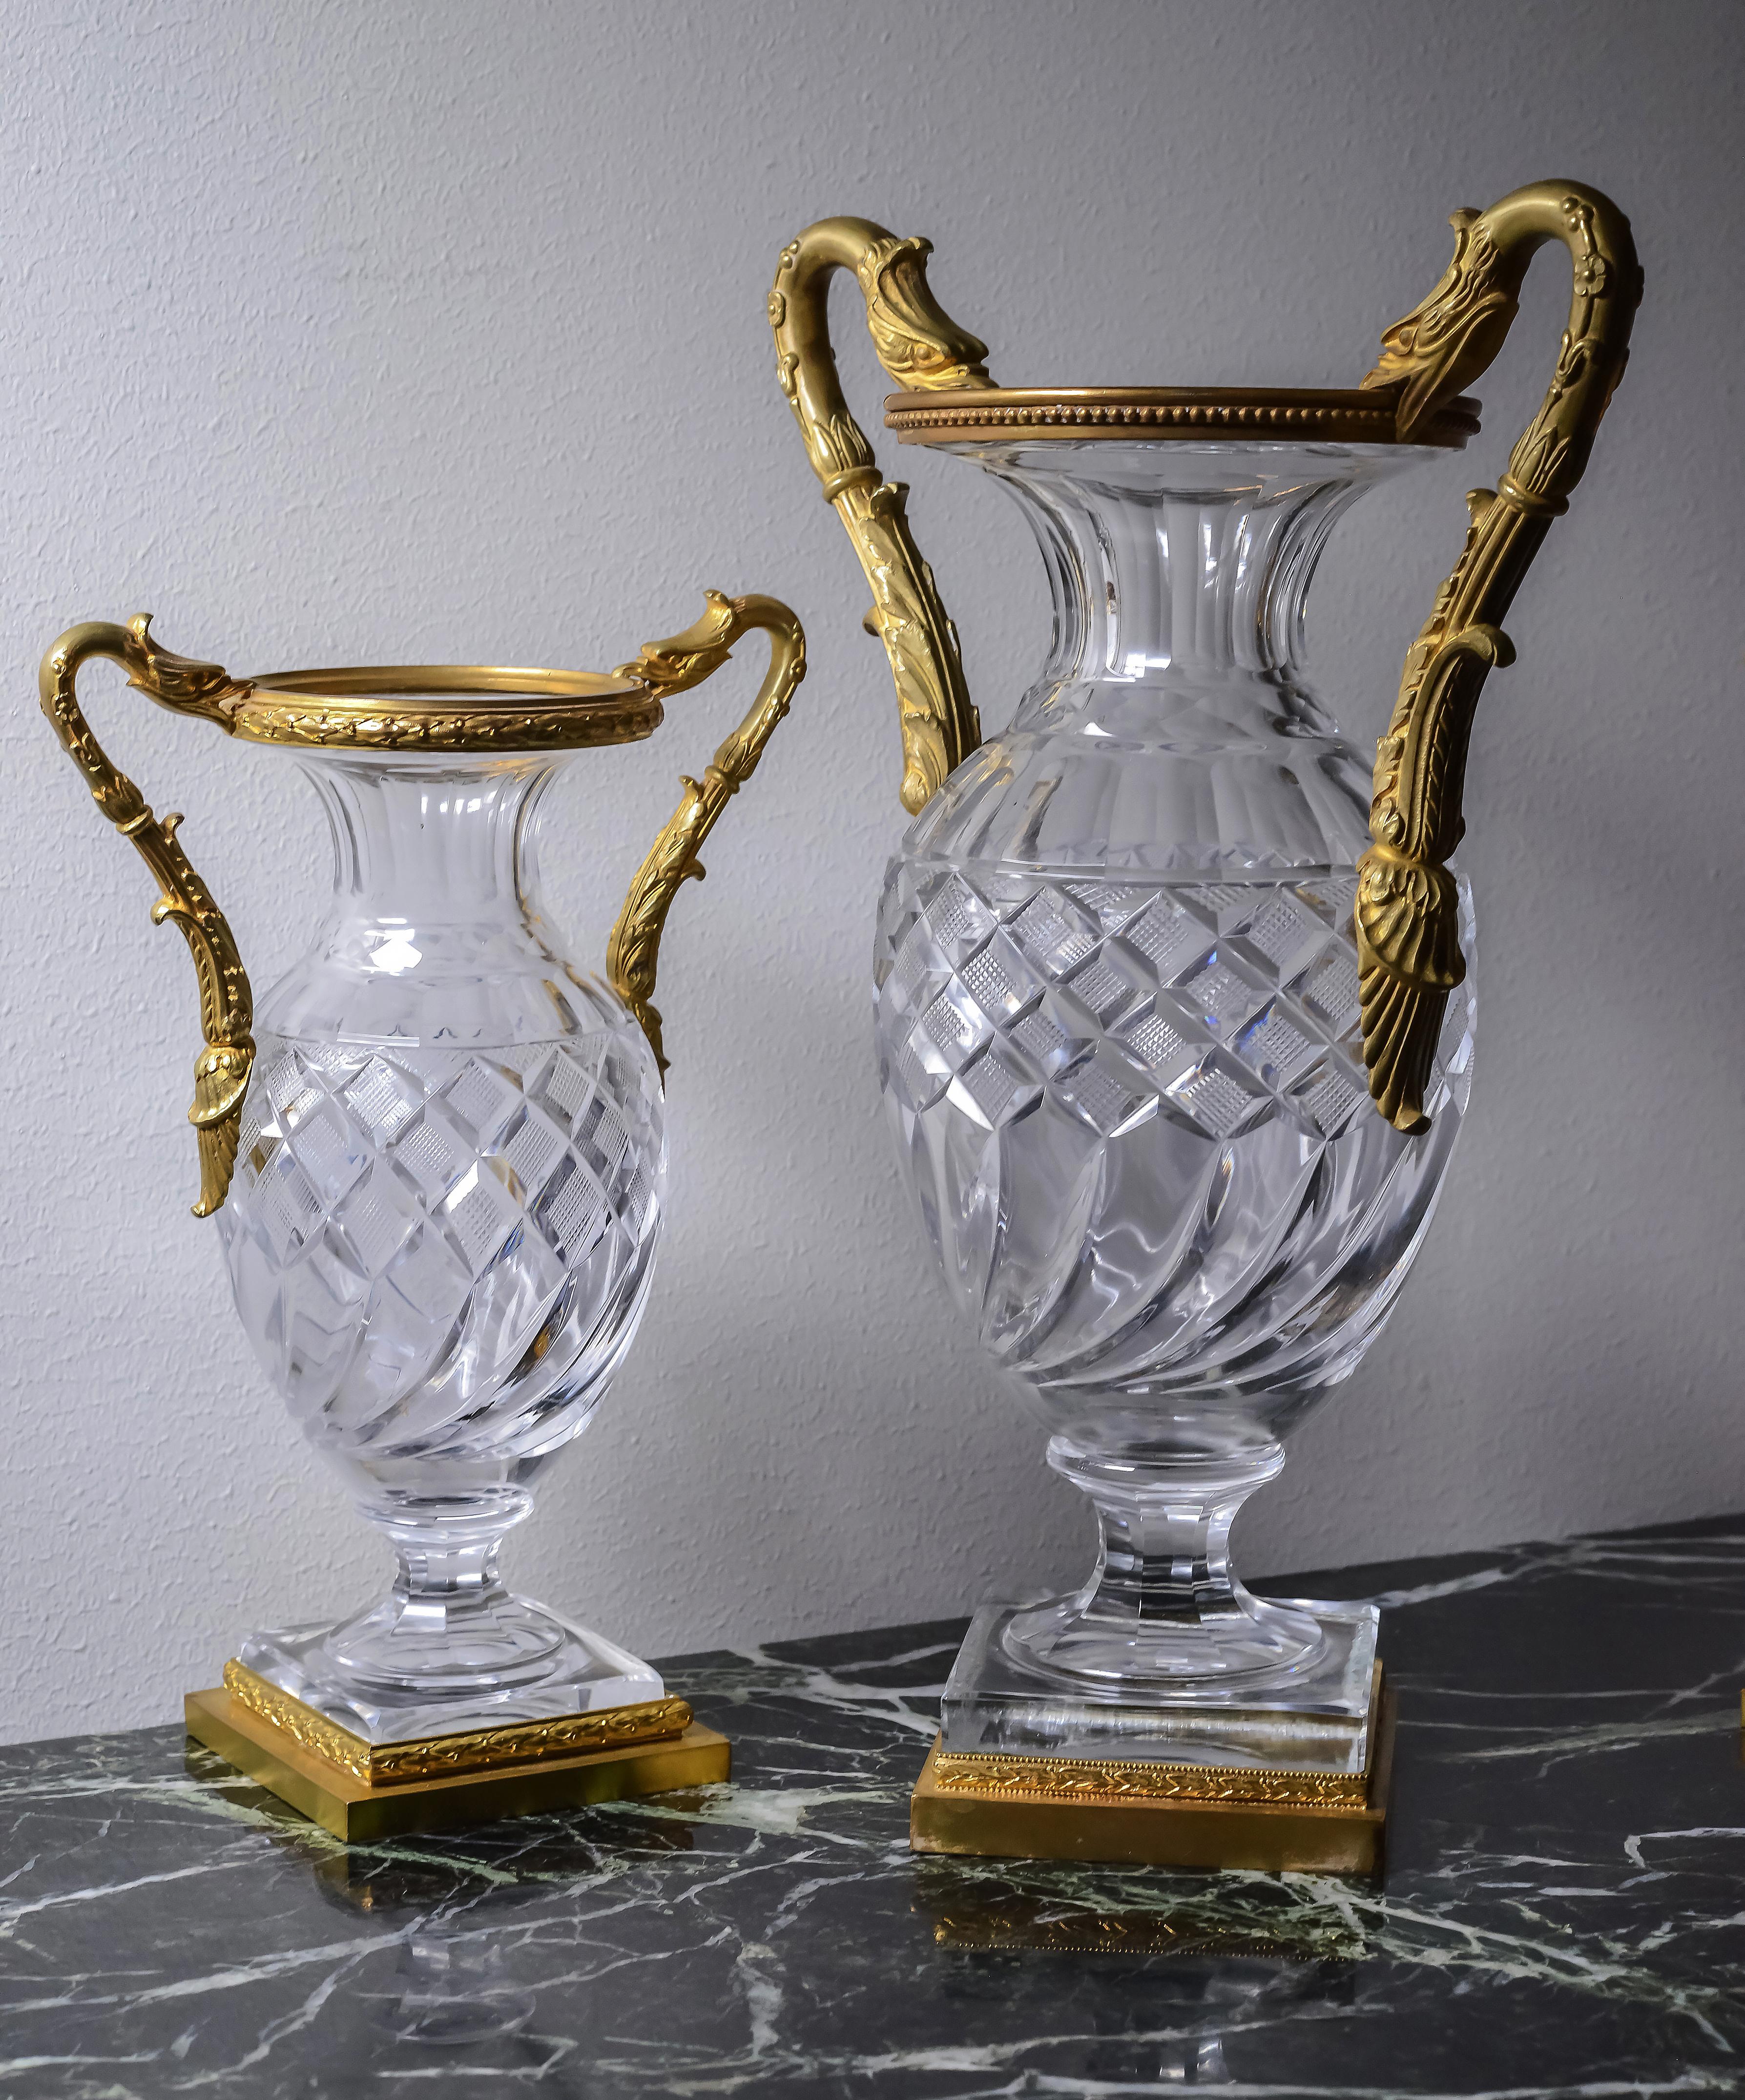 Baccarat Empire Cut Crystal Glass Vases w Gilt Bronze Griffon Heads 19th century For Sale 1